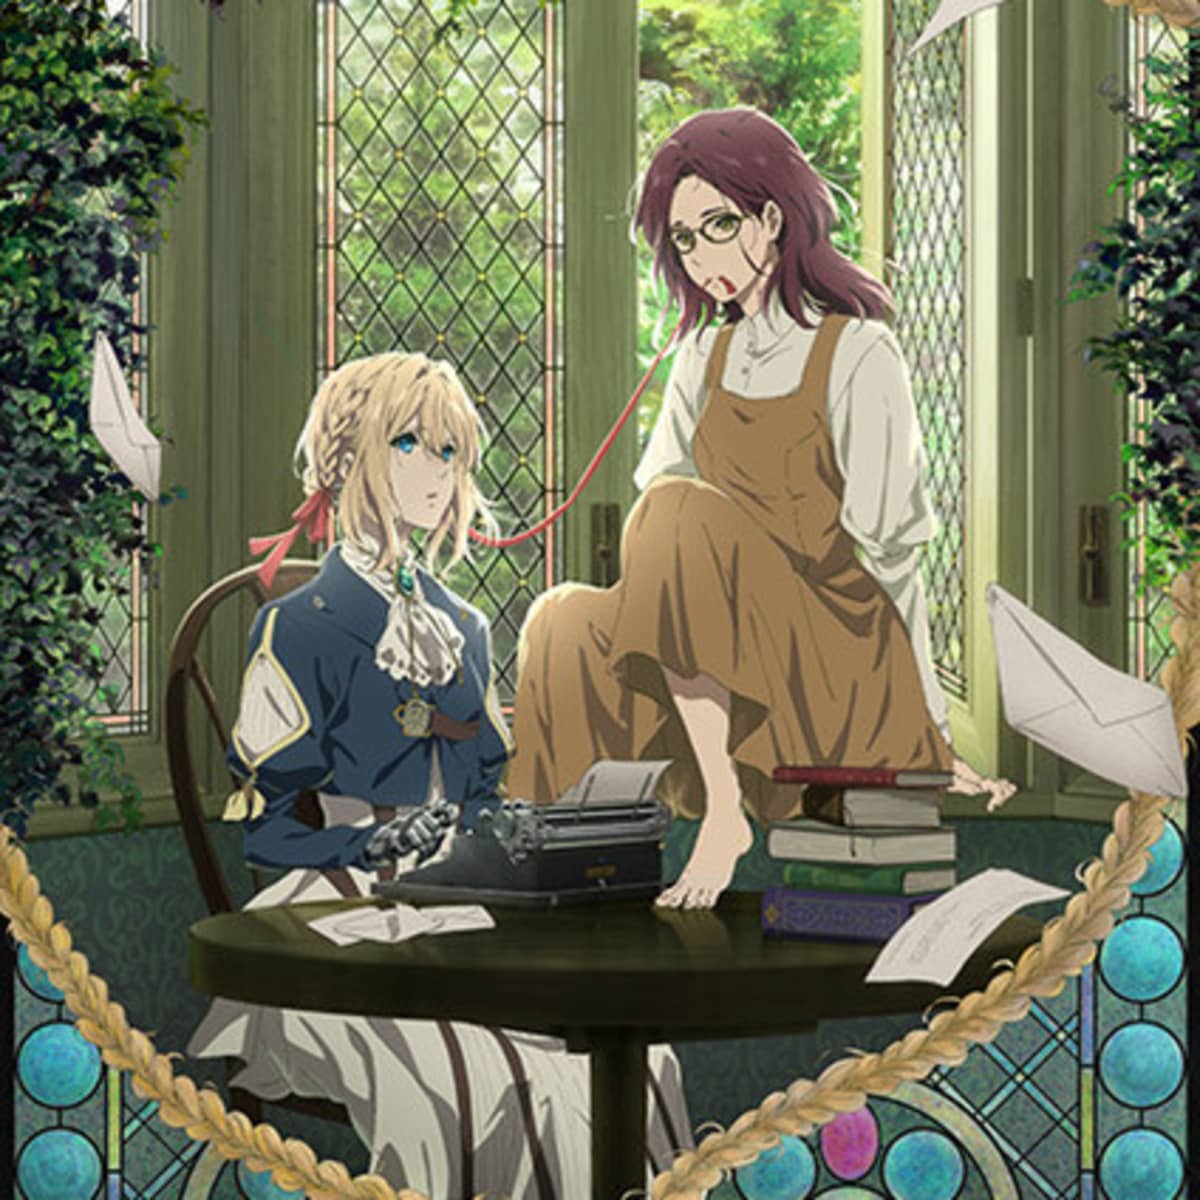 Violet Evergarden: What to Know About the Anime Before the Movie